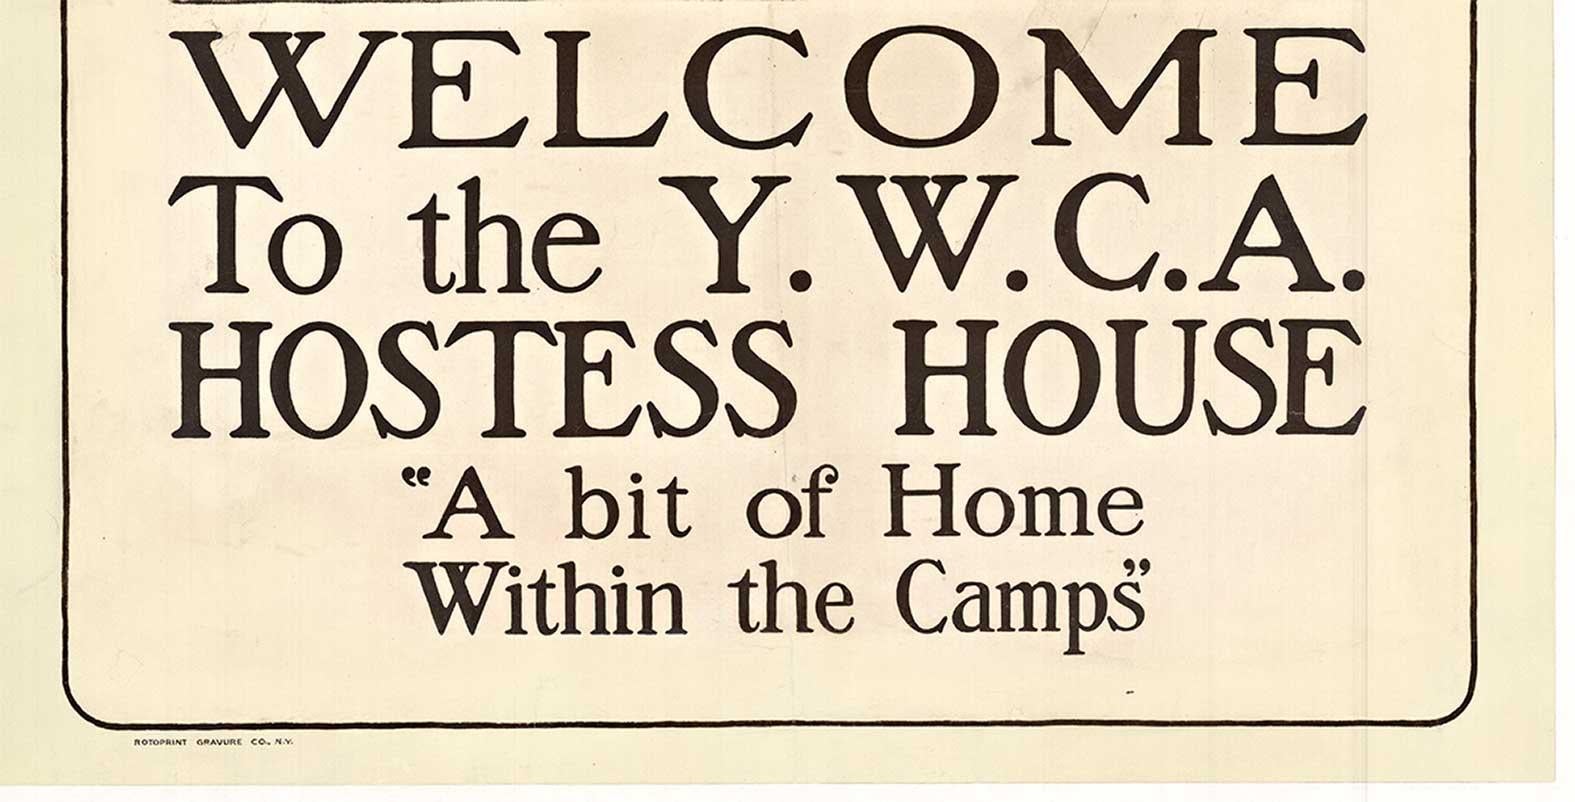 Original 'Soldiers - Sailors and Women Guests' Welcome to the YWCA Hostess House - Print by Walter Tittle